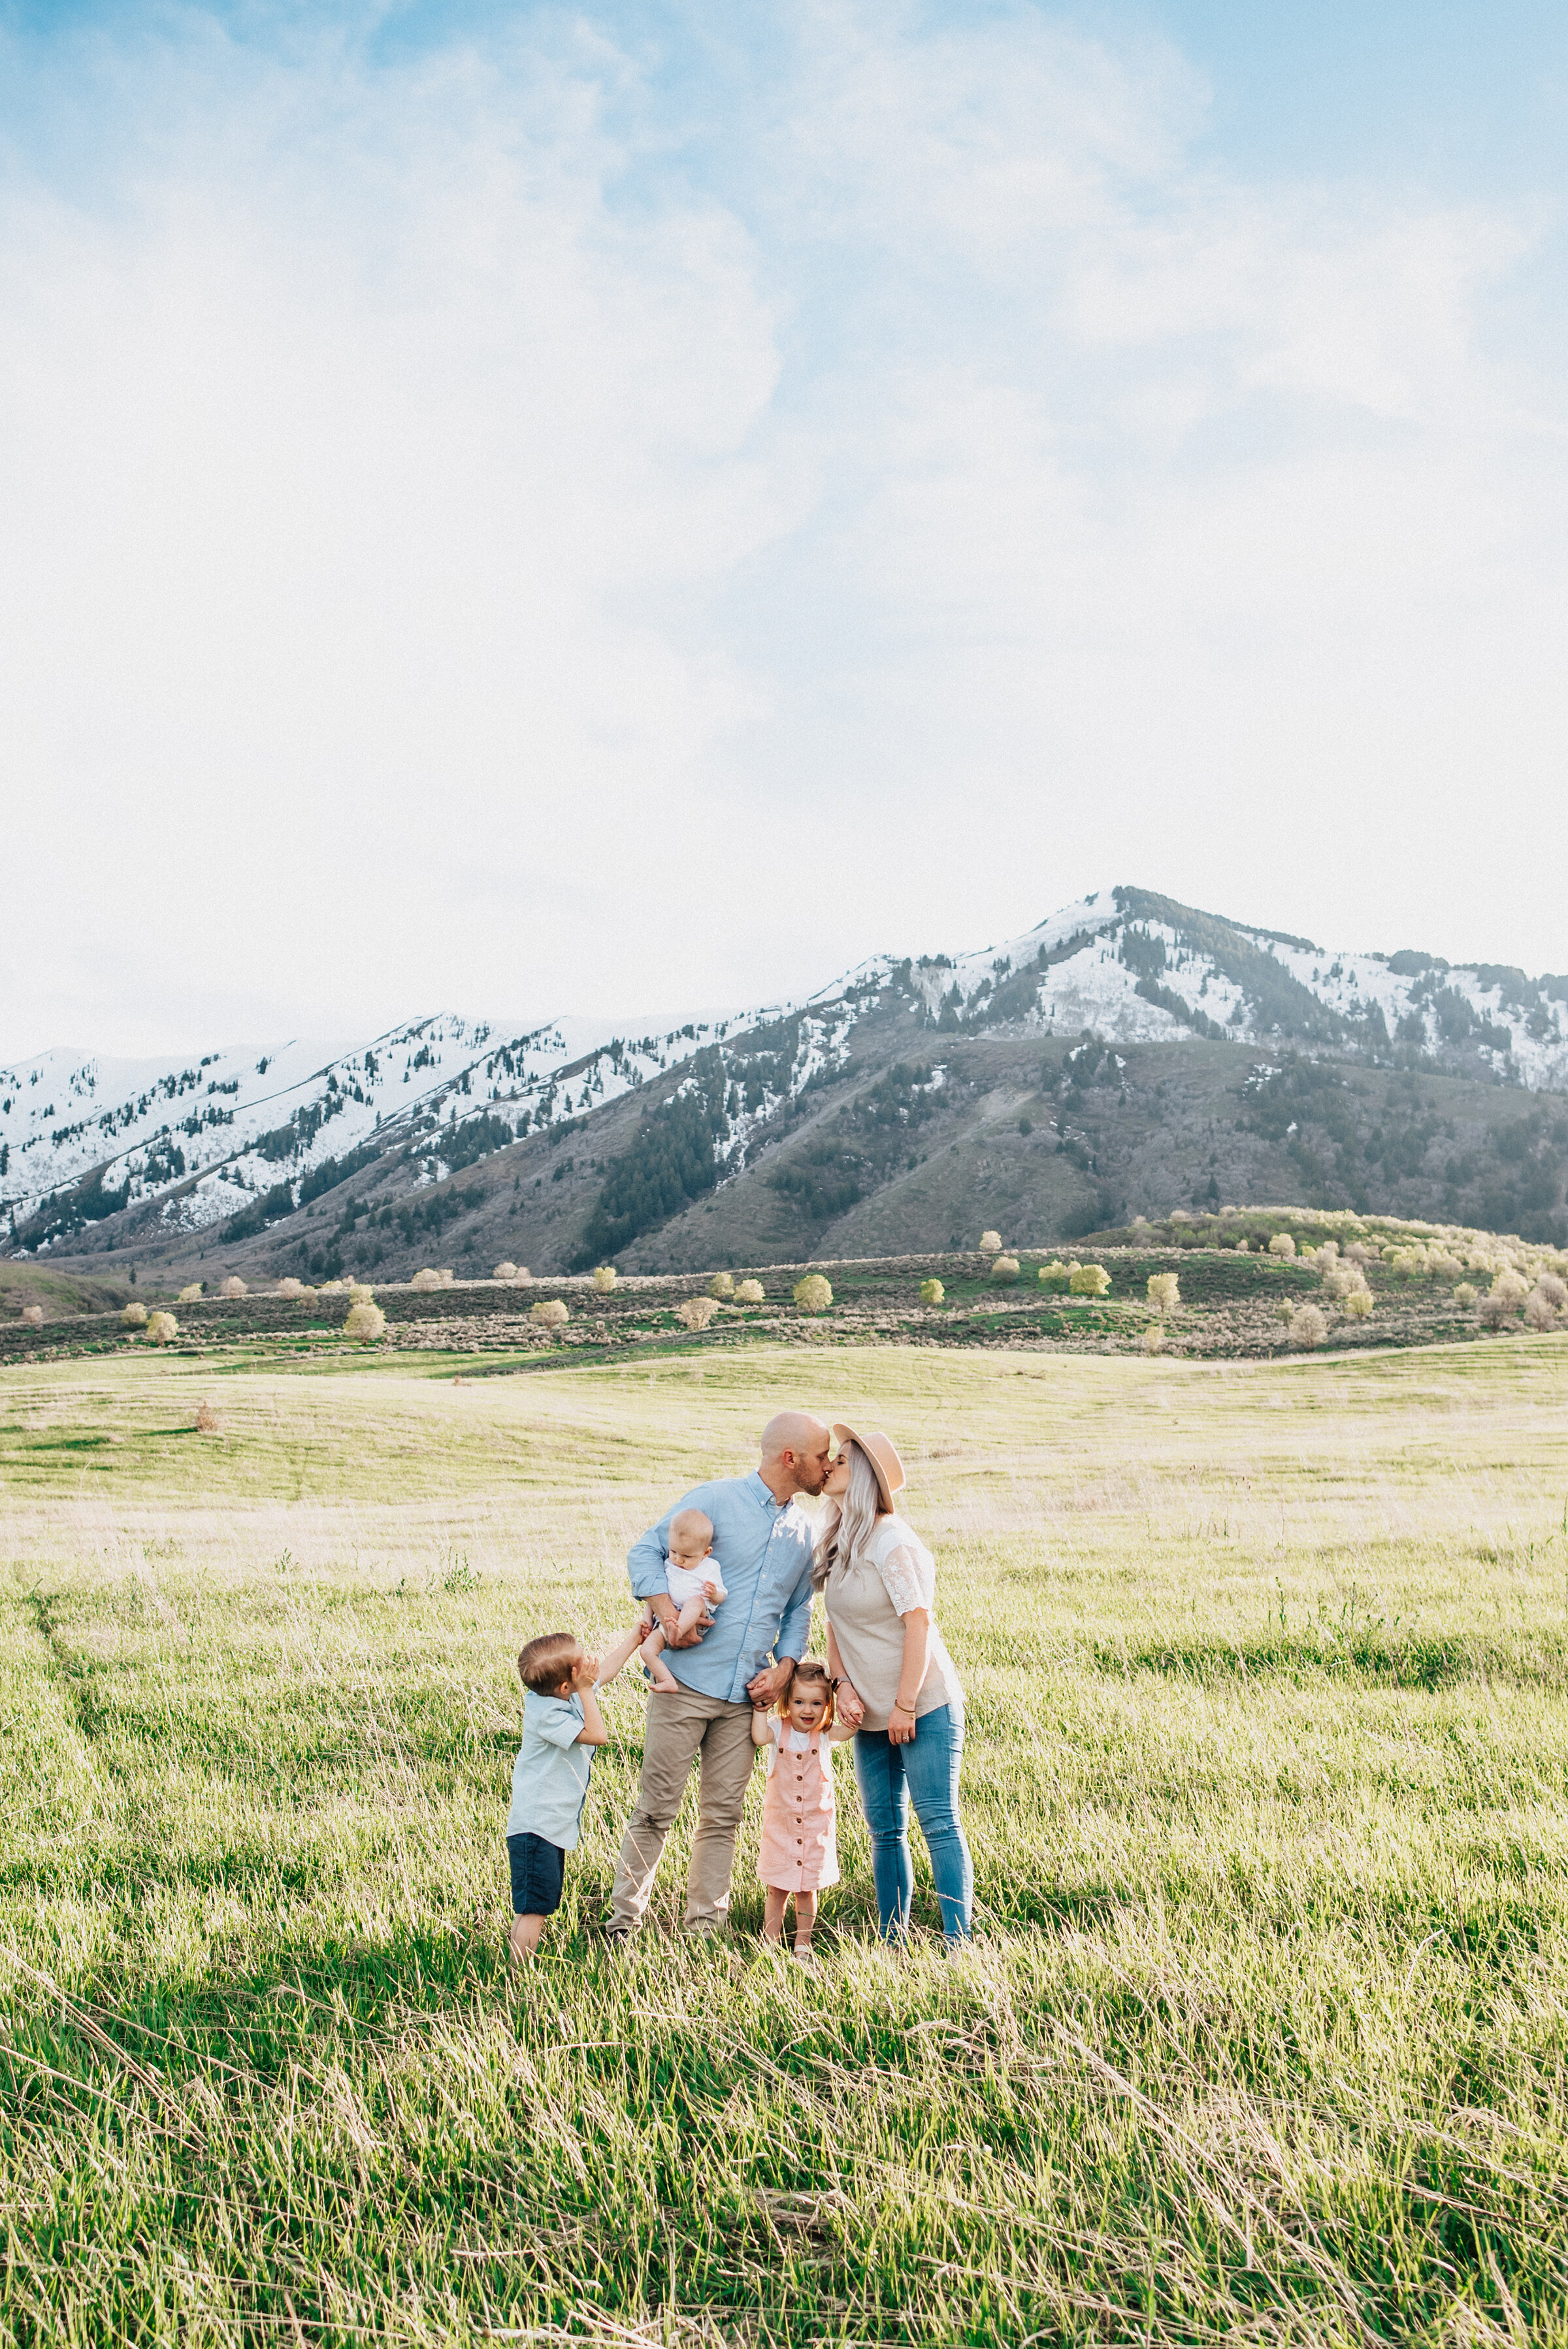  Mom and dad kiss while small children laugh in beautiful logan utah photoshoot. Kristi Alyse Photography mountain themed family photoshoot mom and dad kissing family photography family portraits with small children utah photographer #kristialyse #kristialysephotography #momanddad #familylove #happymarriage #utahphotography #loganutahphotos #mountainfamilyphotos #familyphotoinspo #familyphotoshoot 